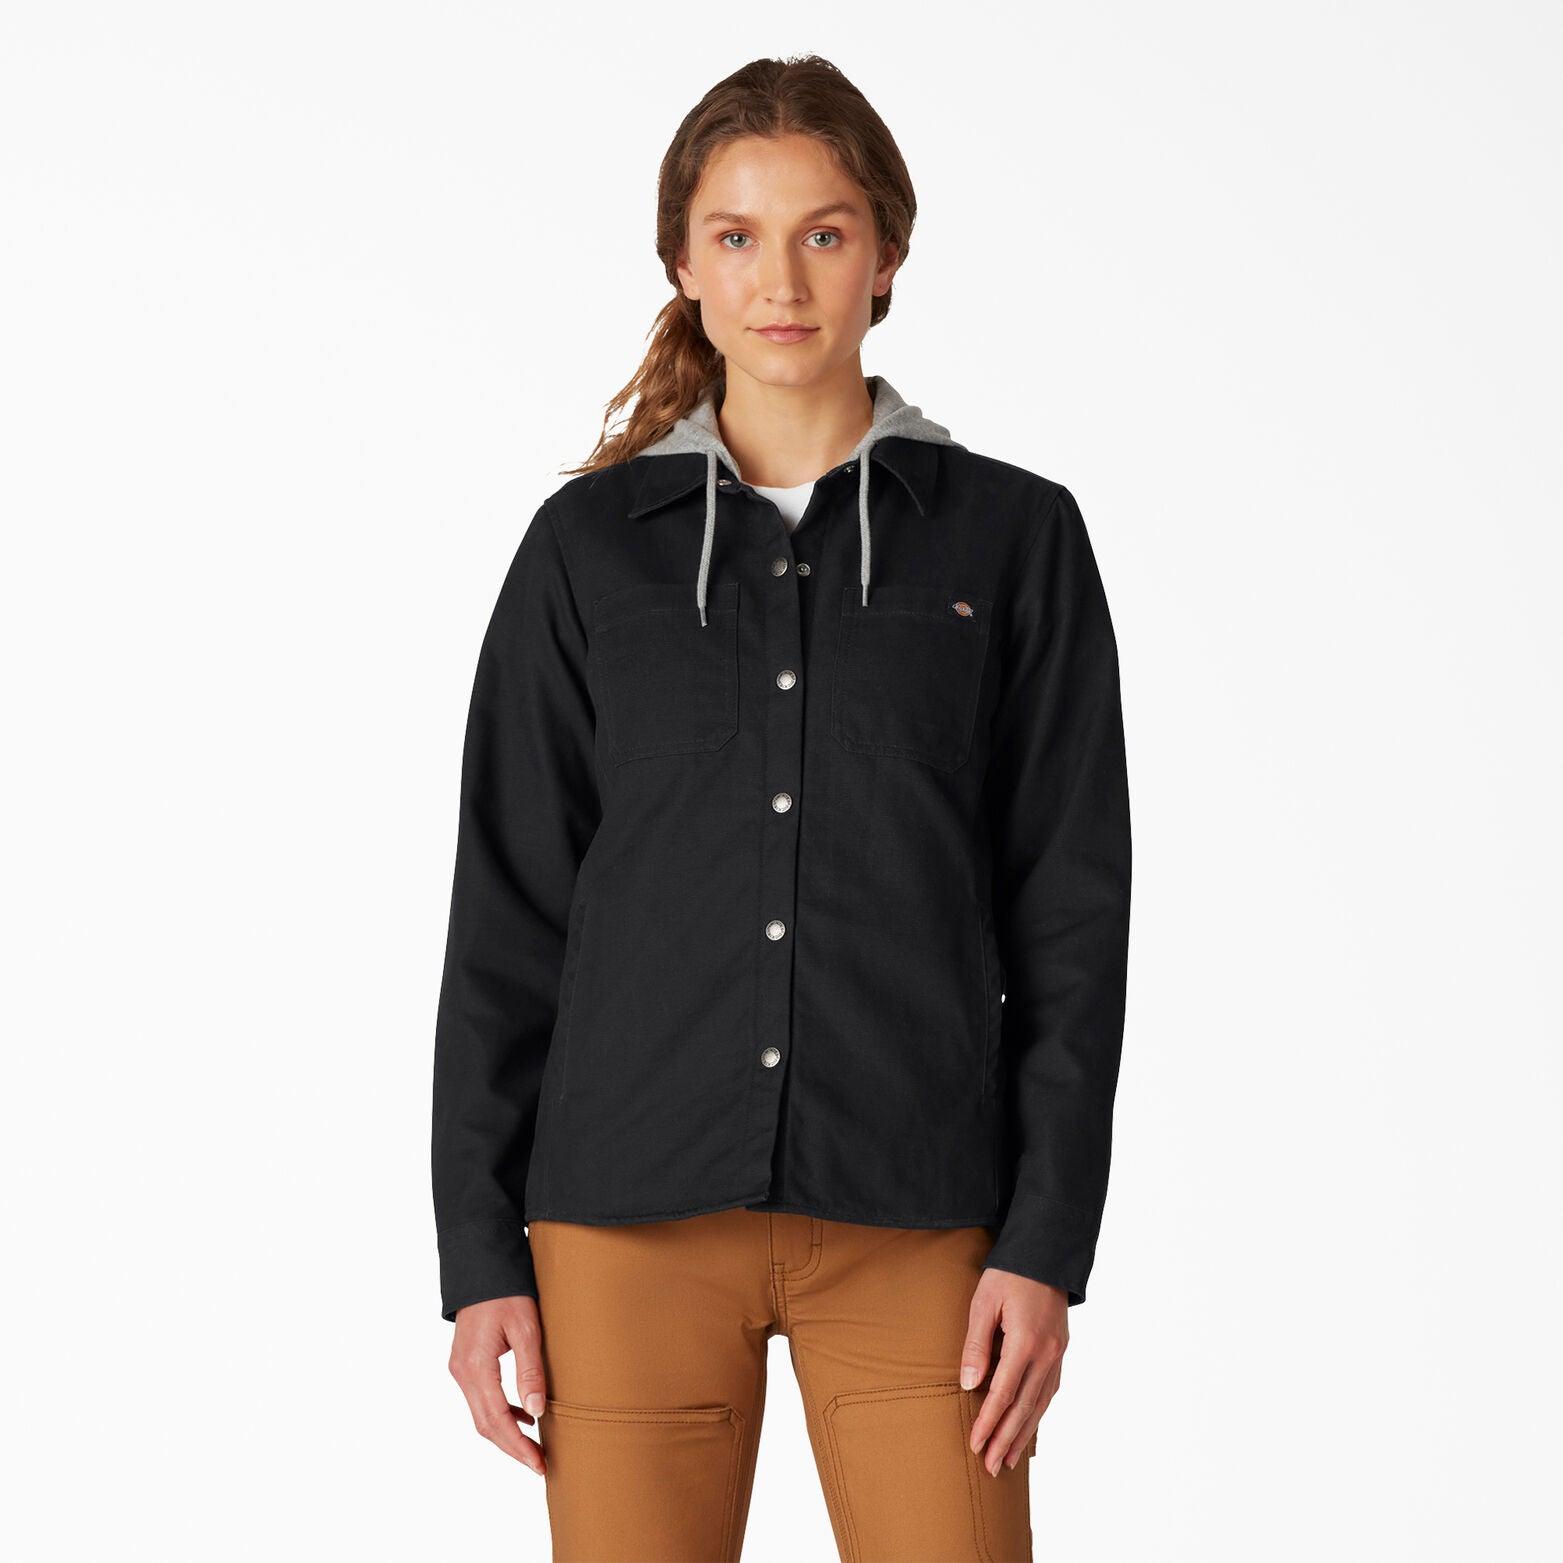 Women's Duck Hooded Shirt Jacket - Black - Purpose-Built / Home of the Trades